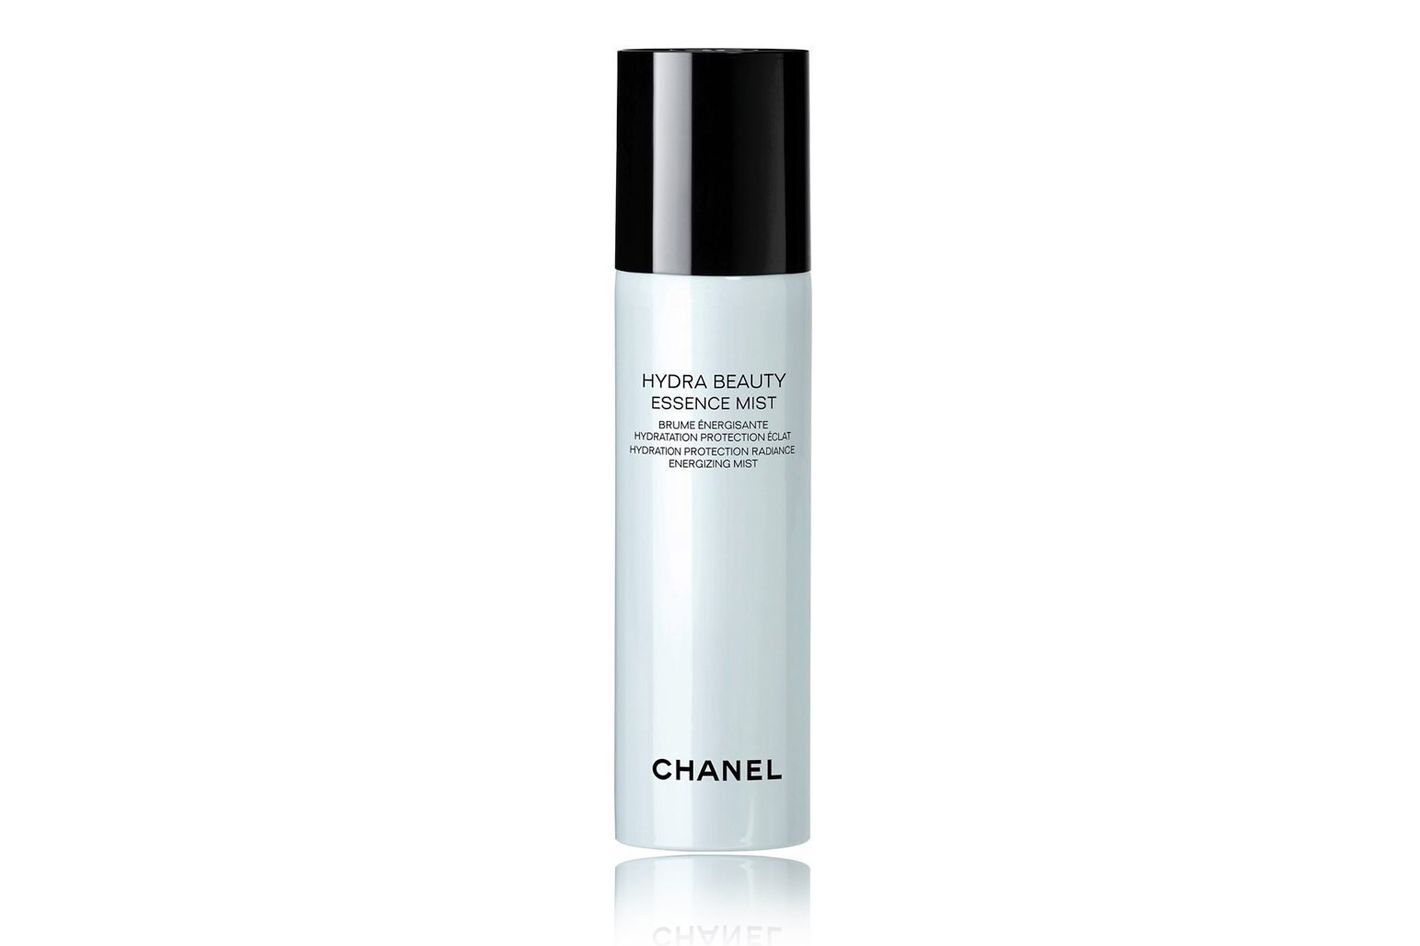 Chanel Hydra Beauty Nutrition Nourishing & Protective Cream (For Dry Skin)  50g/1.7oz - Moisturizers & Treatments, Free Worldwide Shipping